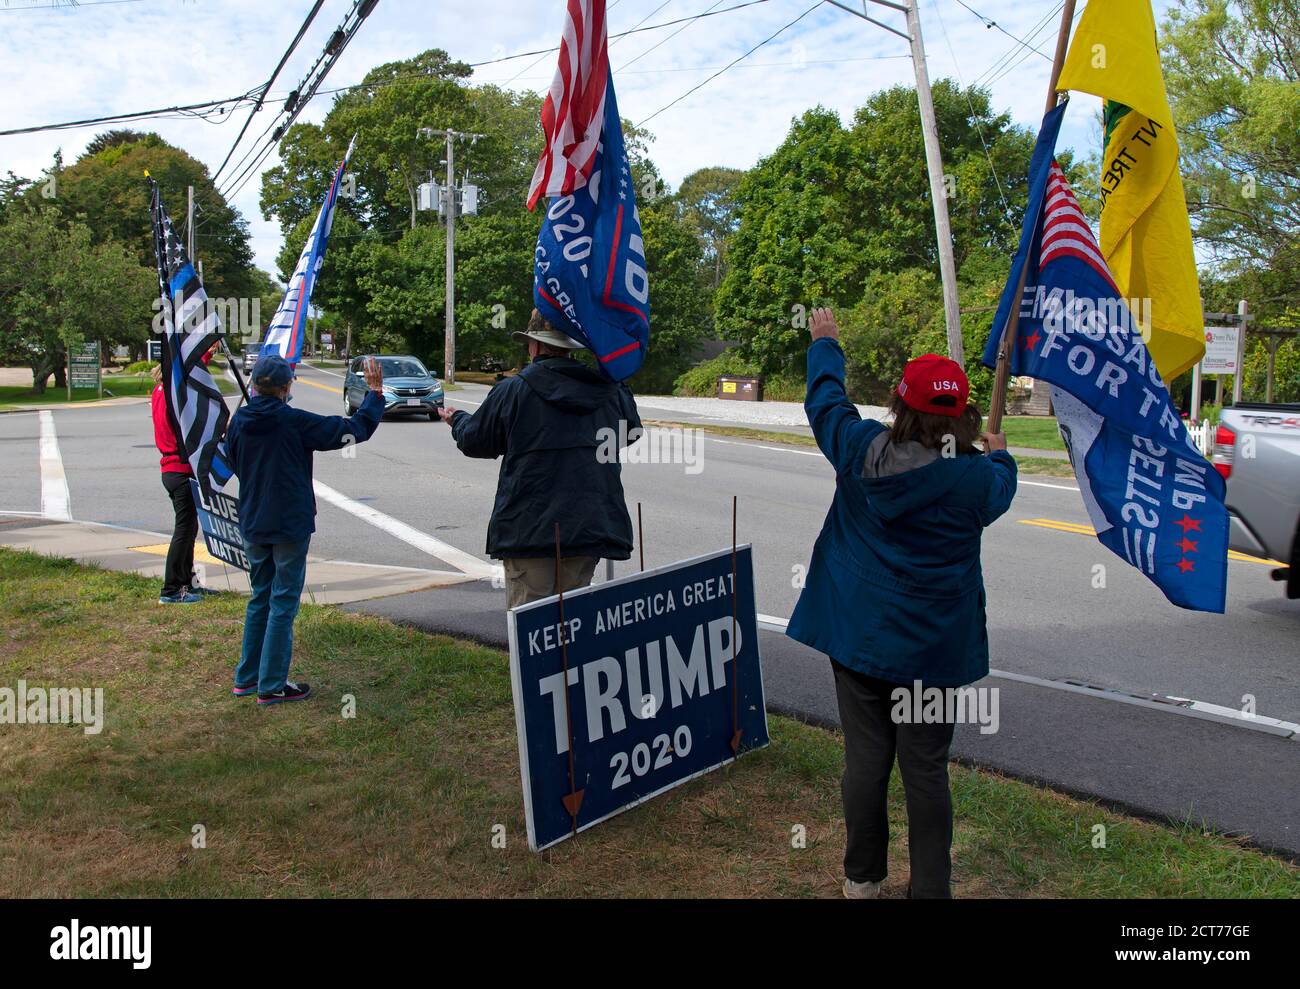 Roadside rally for the re-election of Donald Trump for President of the United States.  Brewster, Massachusetts, on Cape Cod, USA Stock Photo